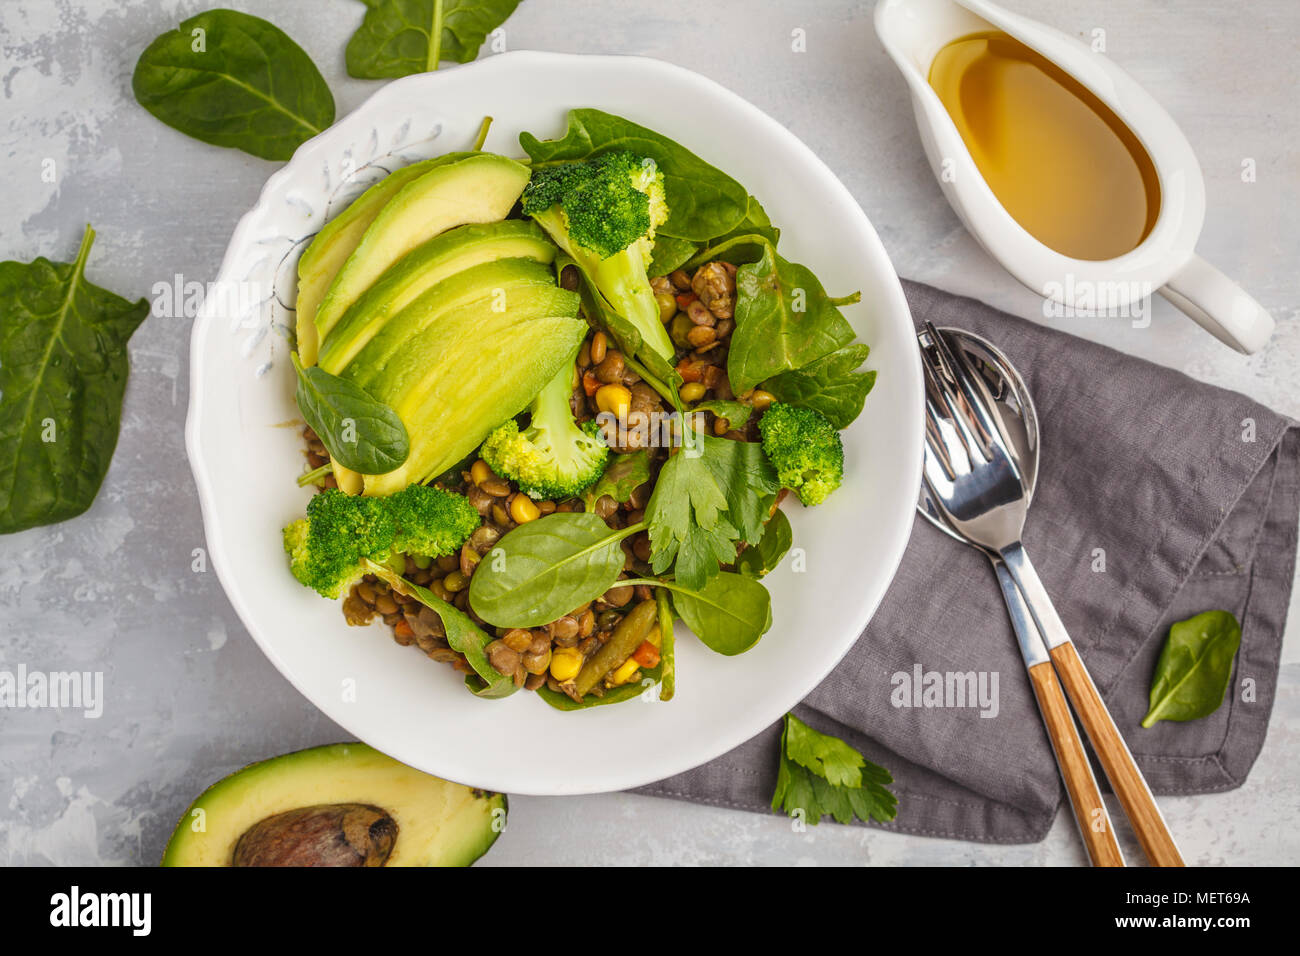 Lentil green curry salad with broccoli and avocado. Healthy vegan food concept. Stock Photo